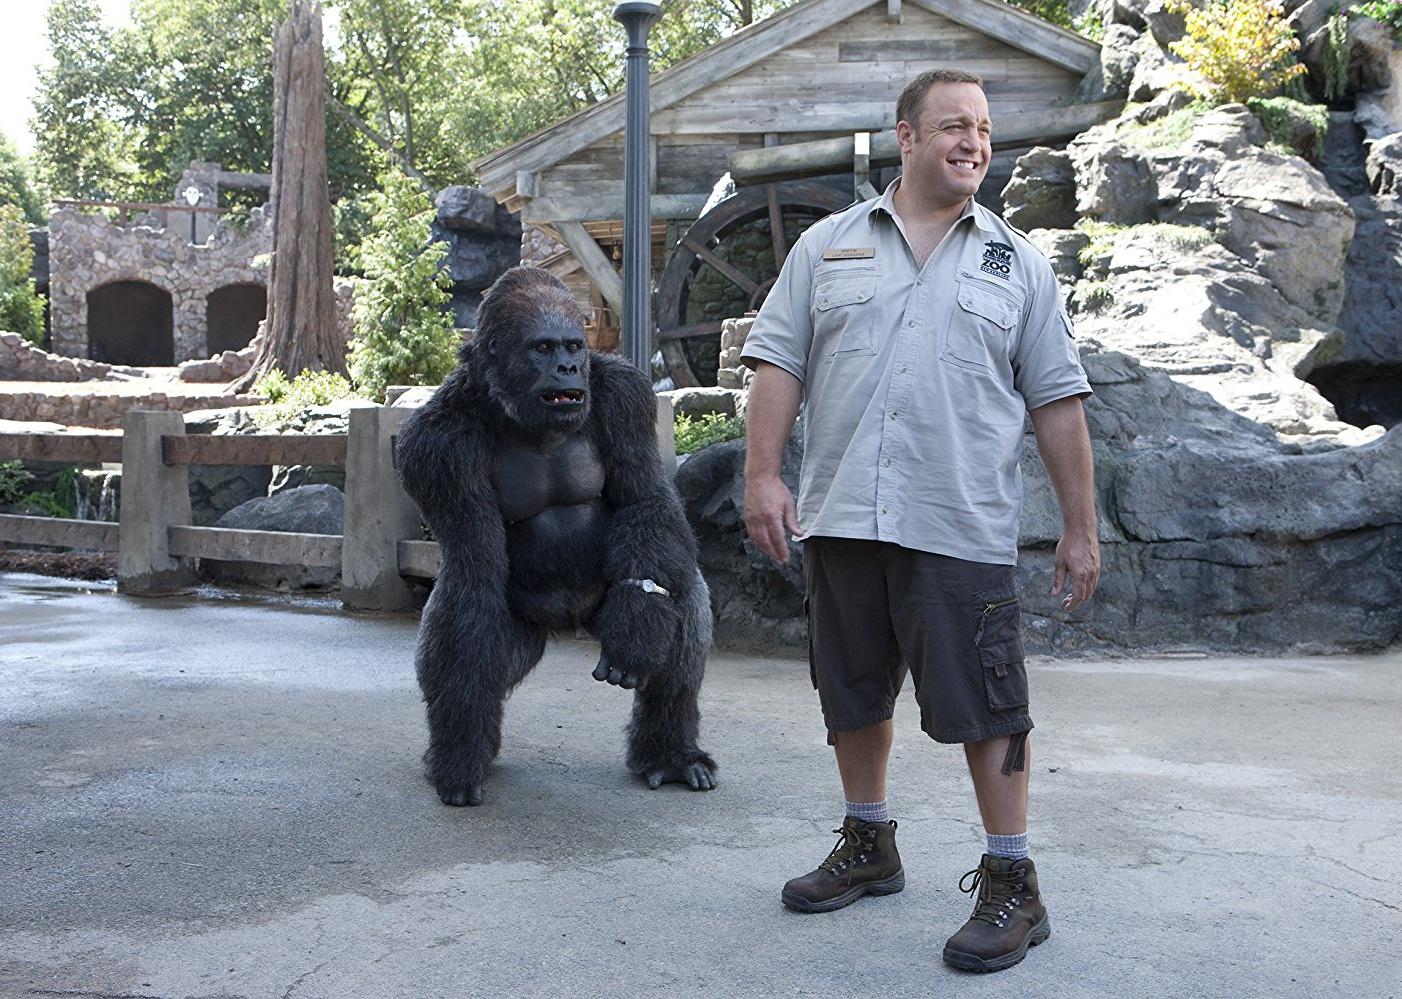 Kevin James standing next to a gorilla.